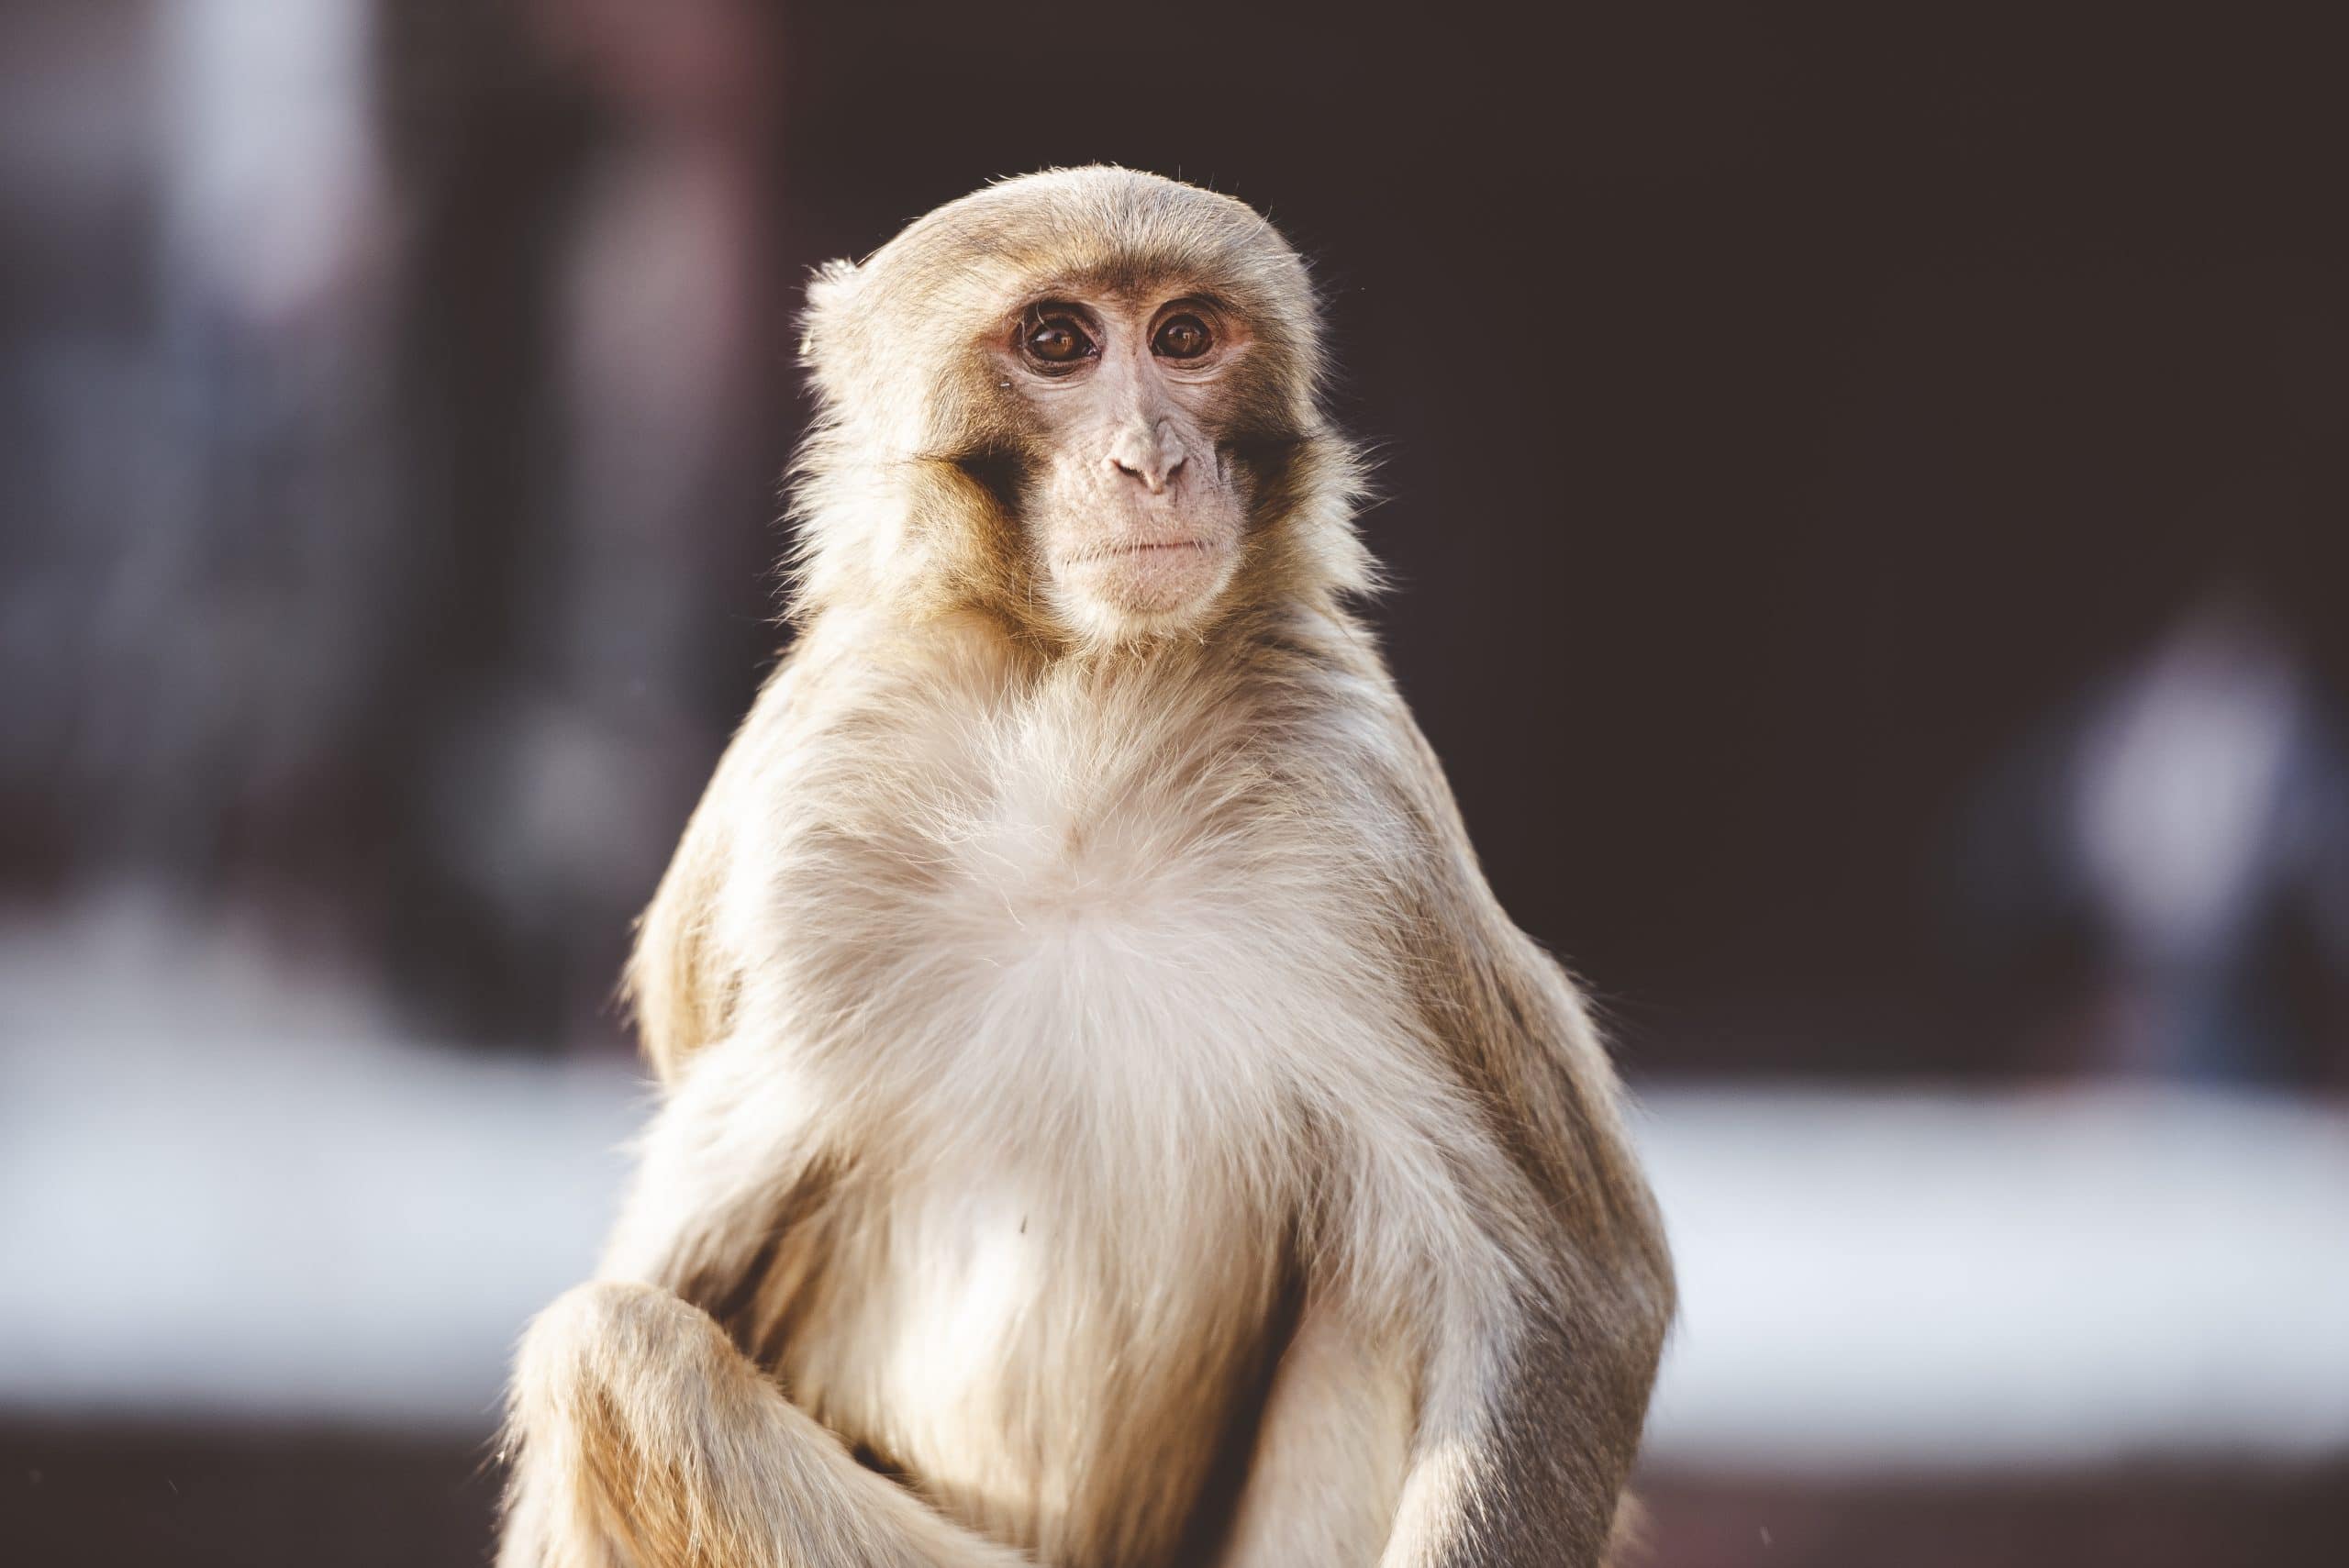 Closeup shot of a monkey sitting and looking at the camera with a blurred background